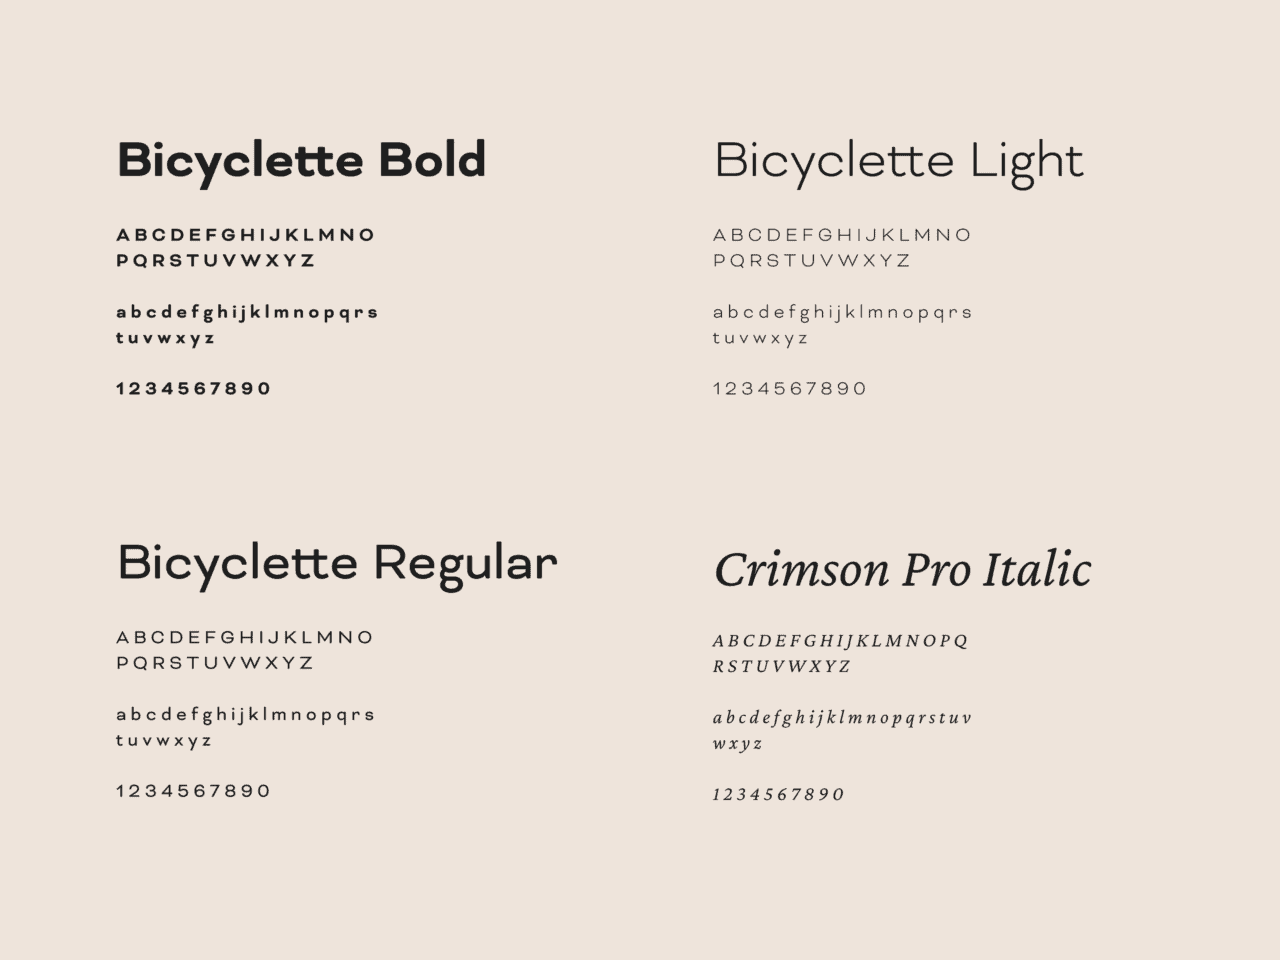 On a pale background is black text featuring Bicyclette Bold, Bicyclette Light, Bicyclette Regular and Crimson Pro Italic fonts